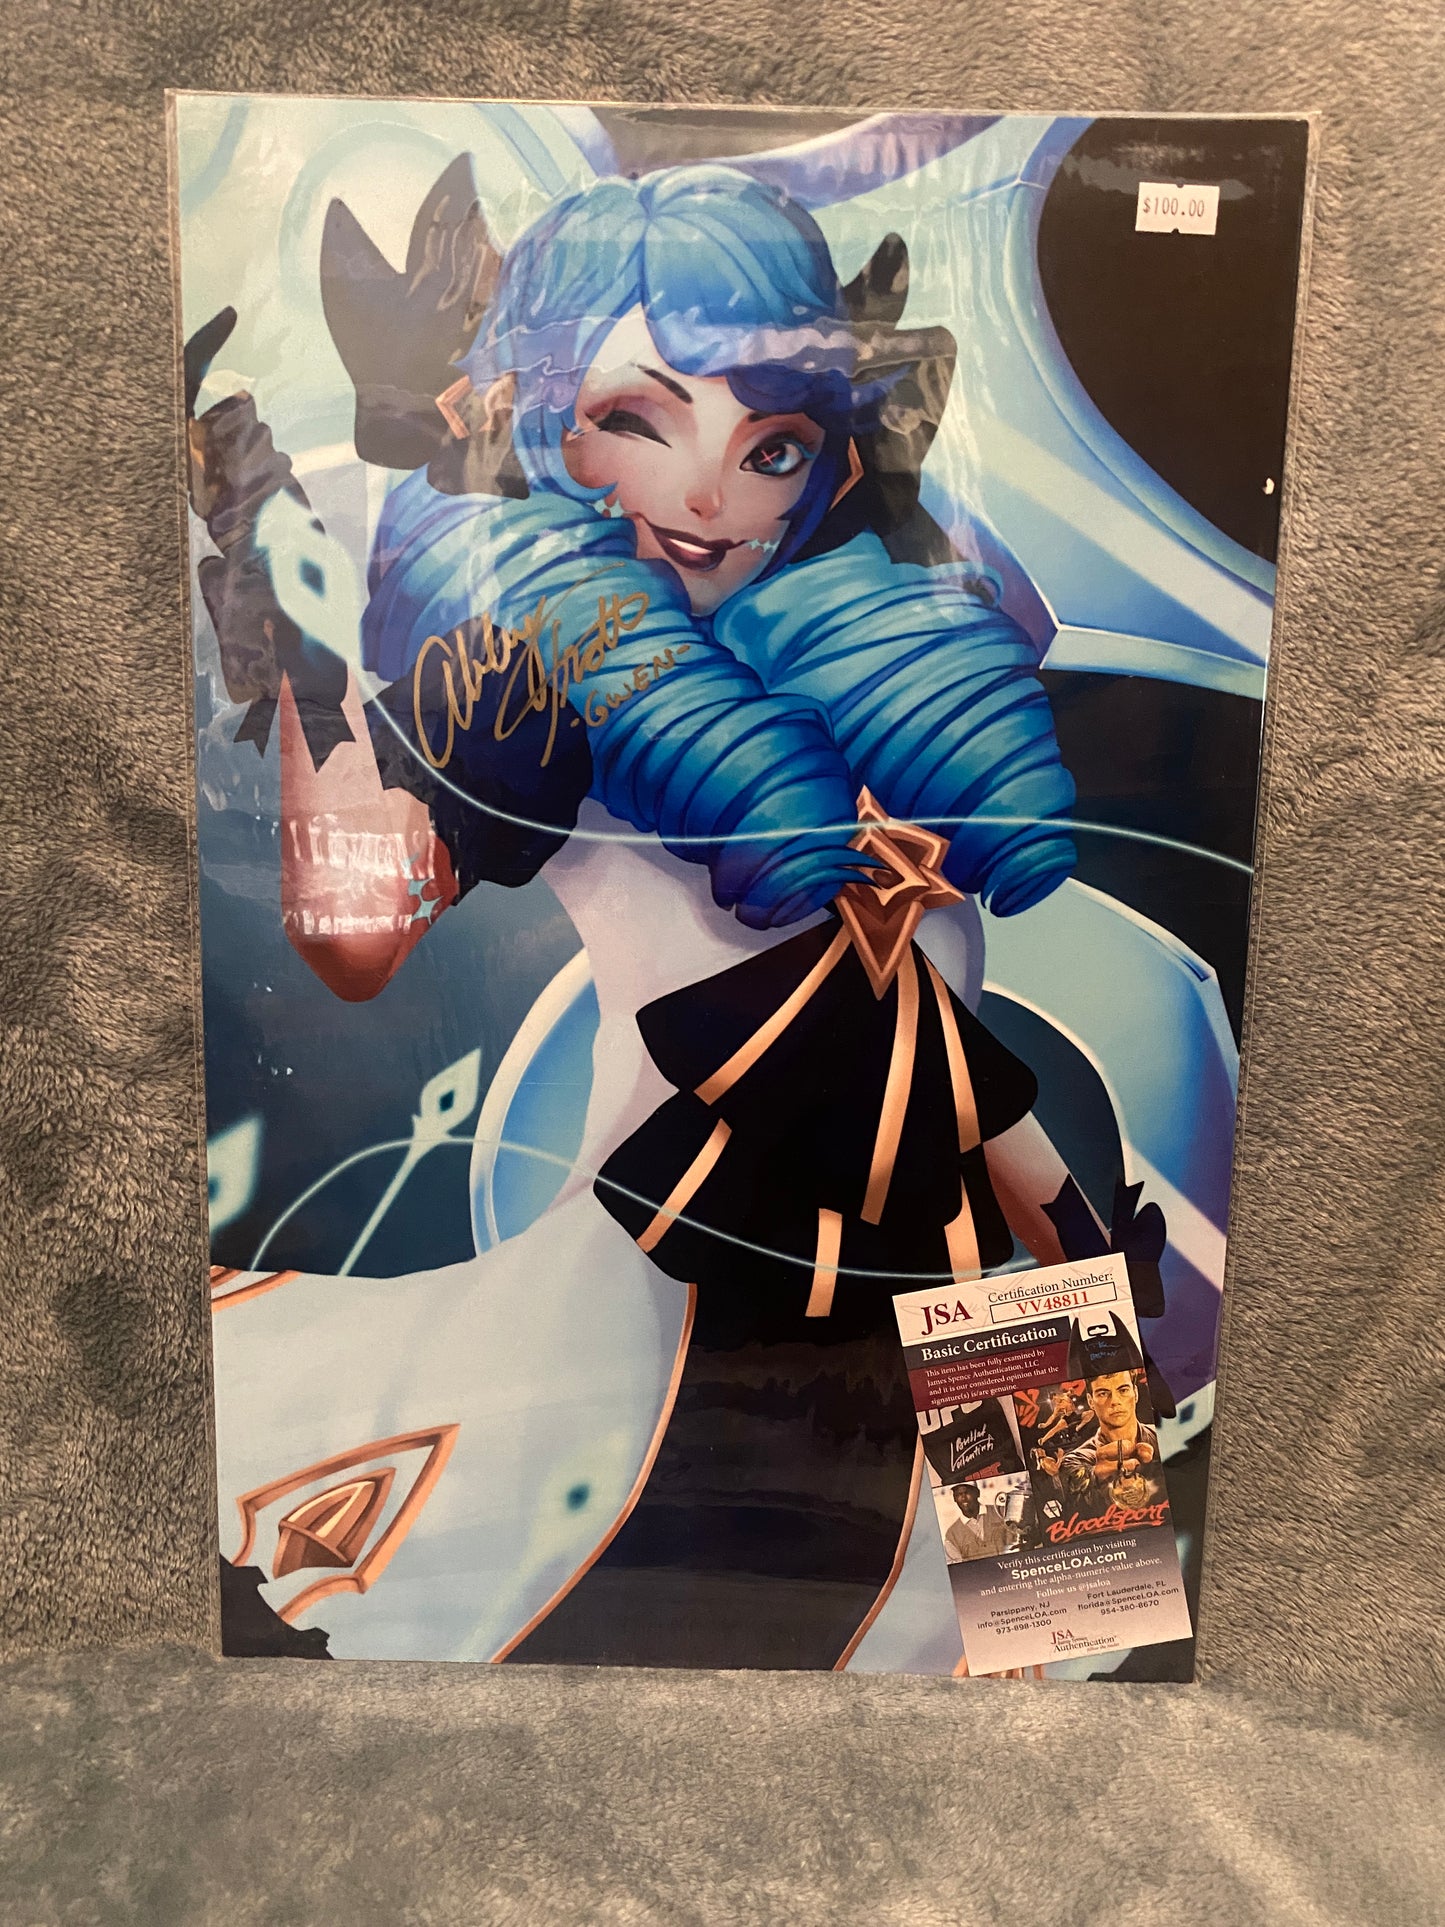 Gwen League of Legends 12x18 Metal Print Signed by Abby Trott